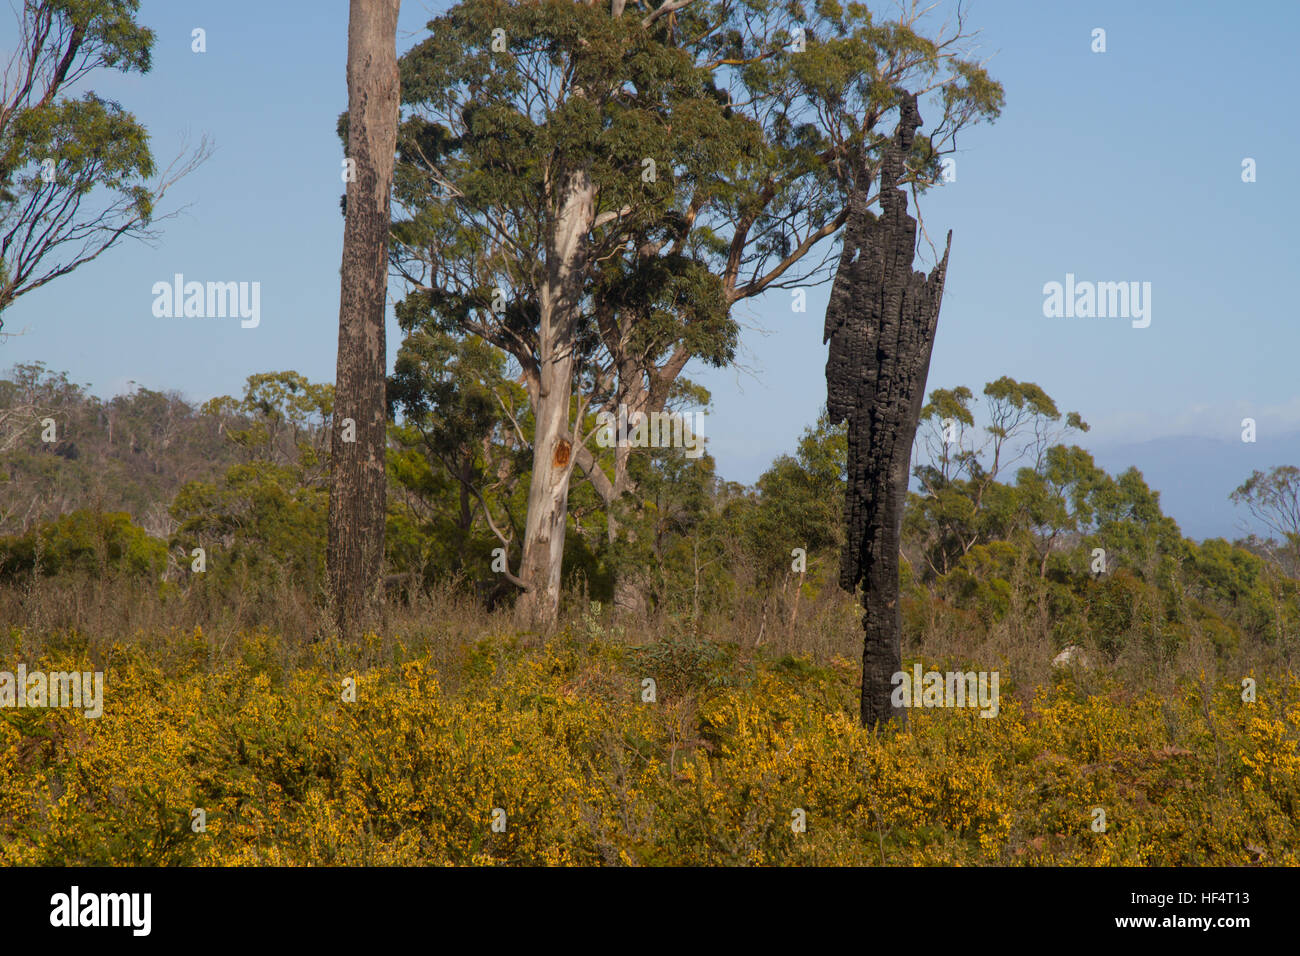 Remains of a burnt tree in a recovered landscape Stock Photo